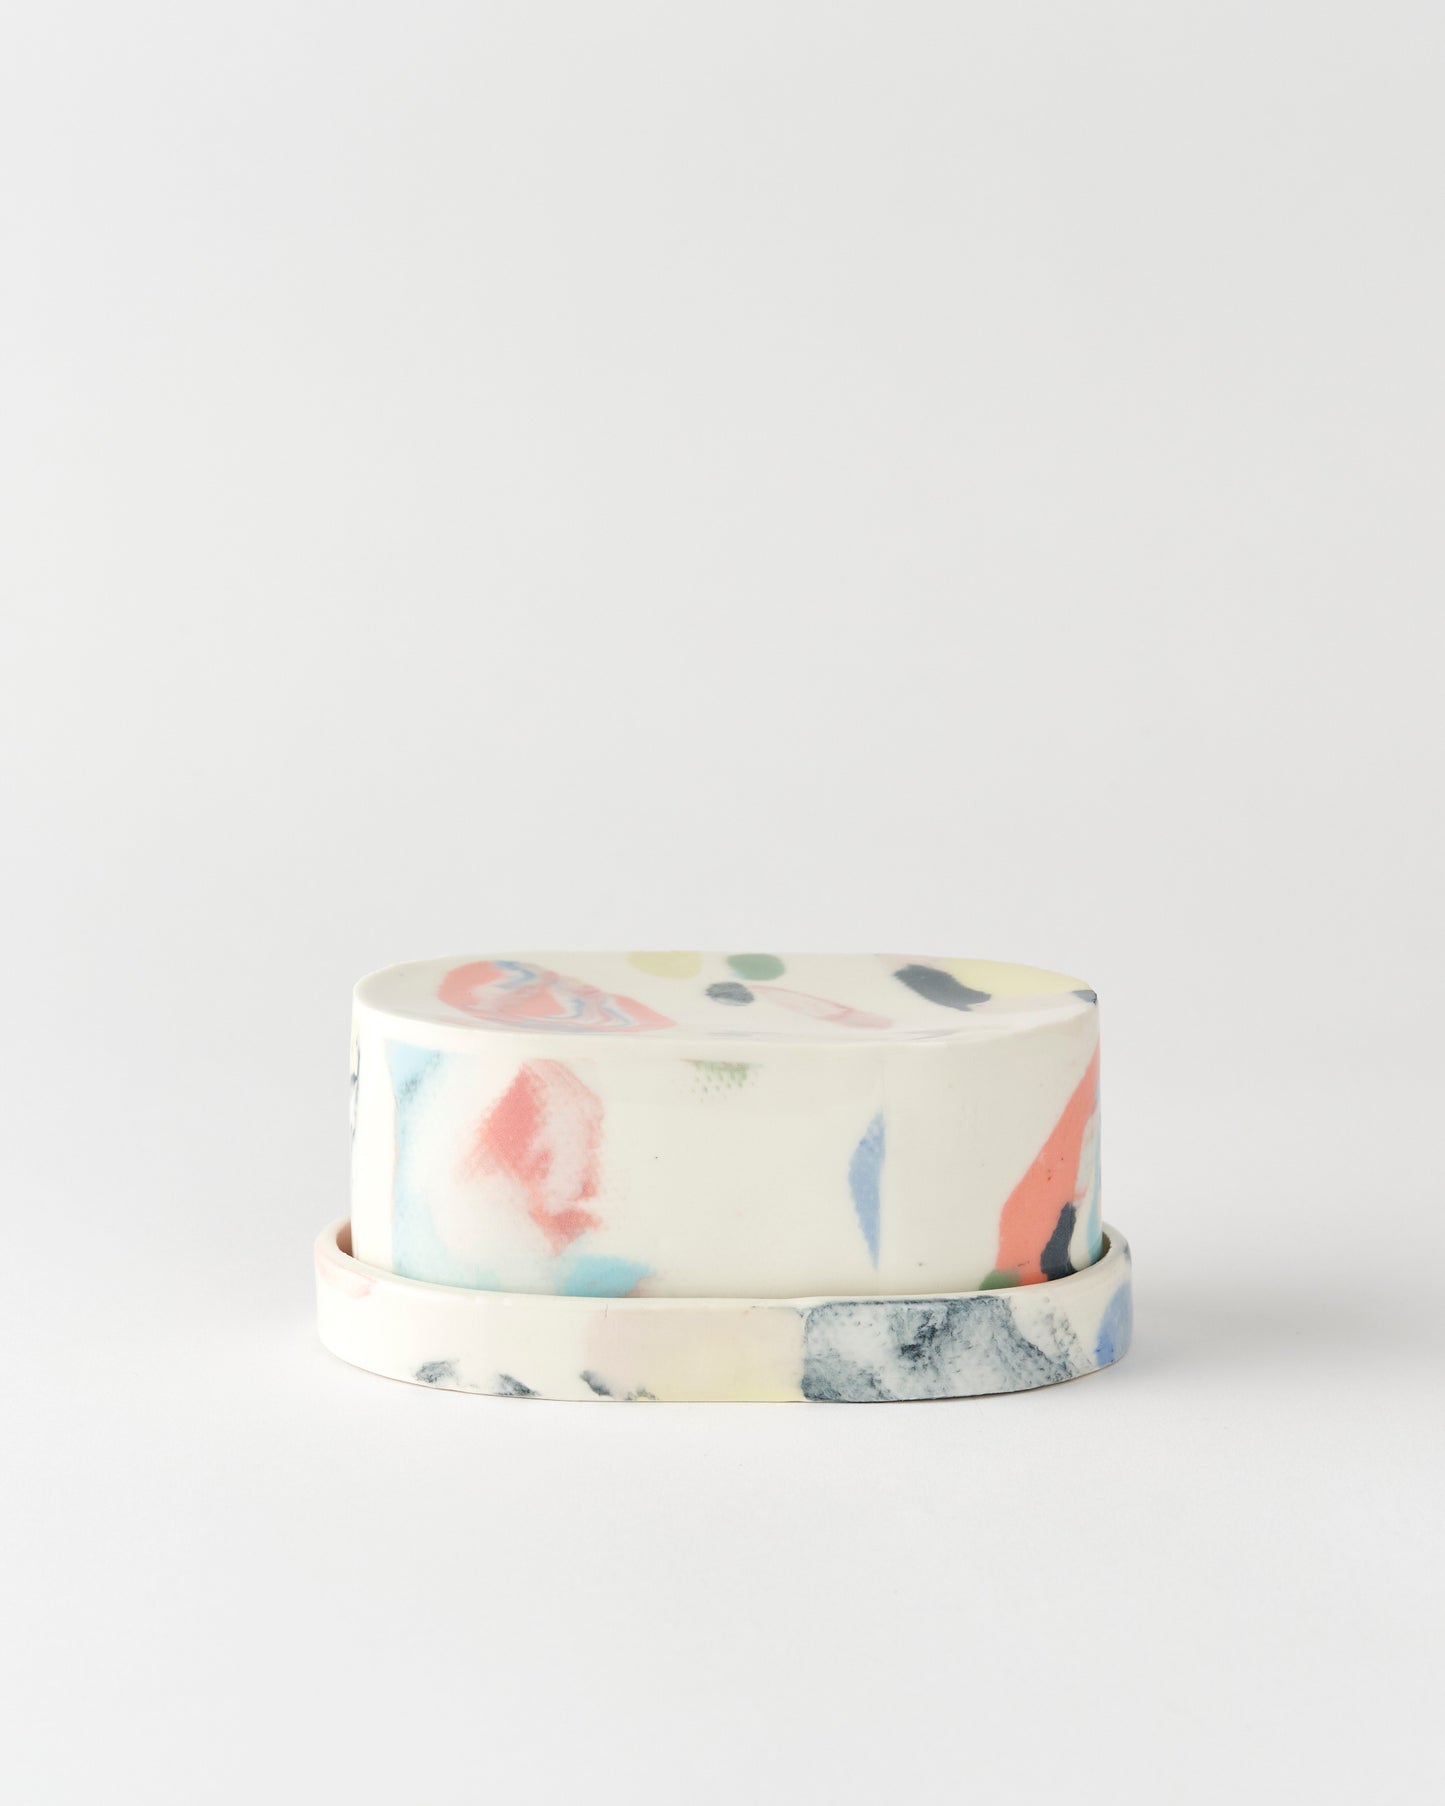 Marie Priour / UHU / Butter Dish